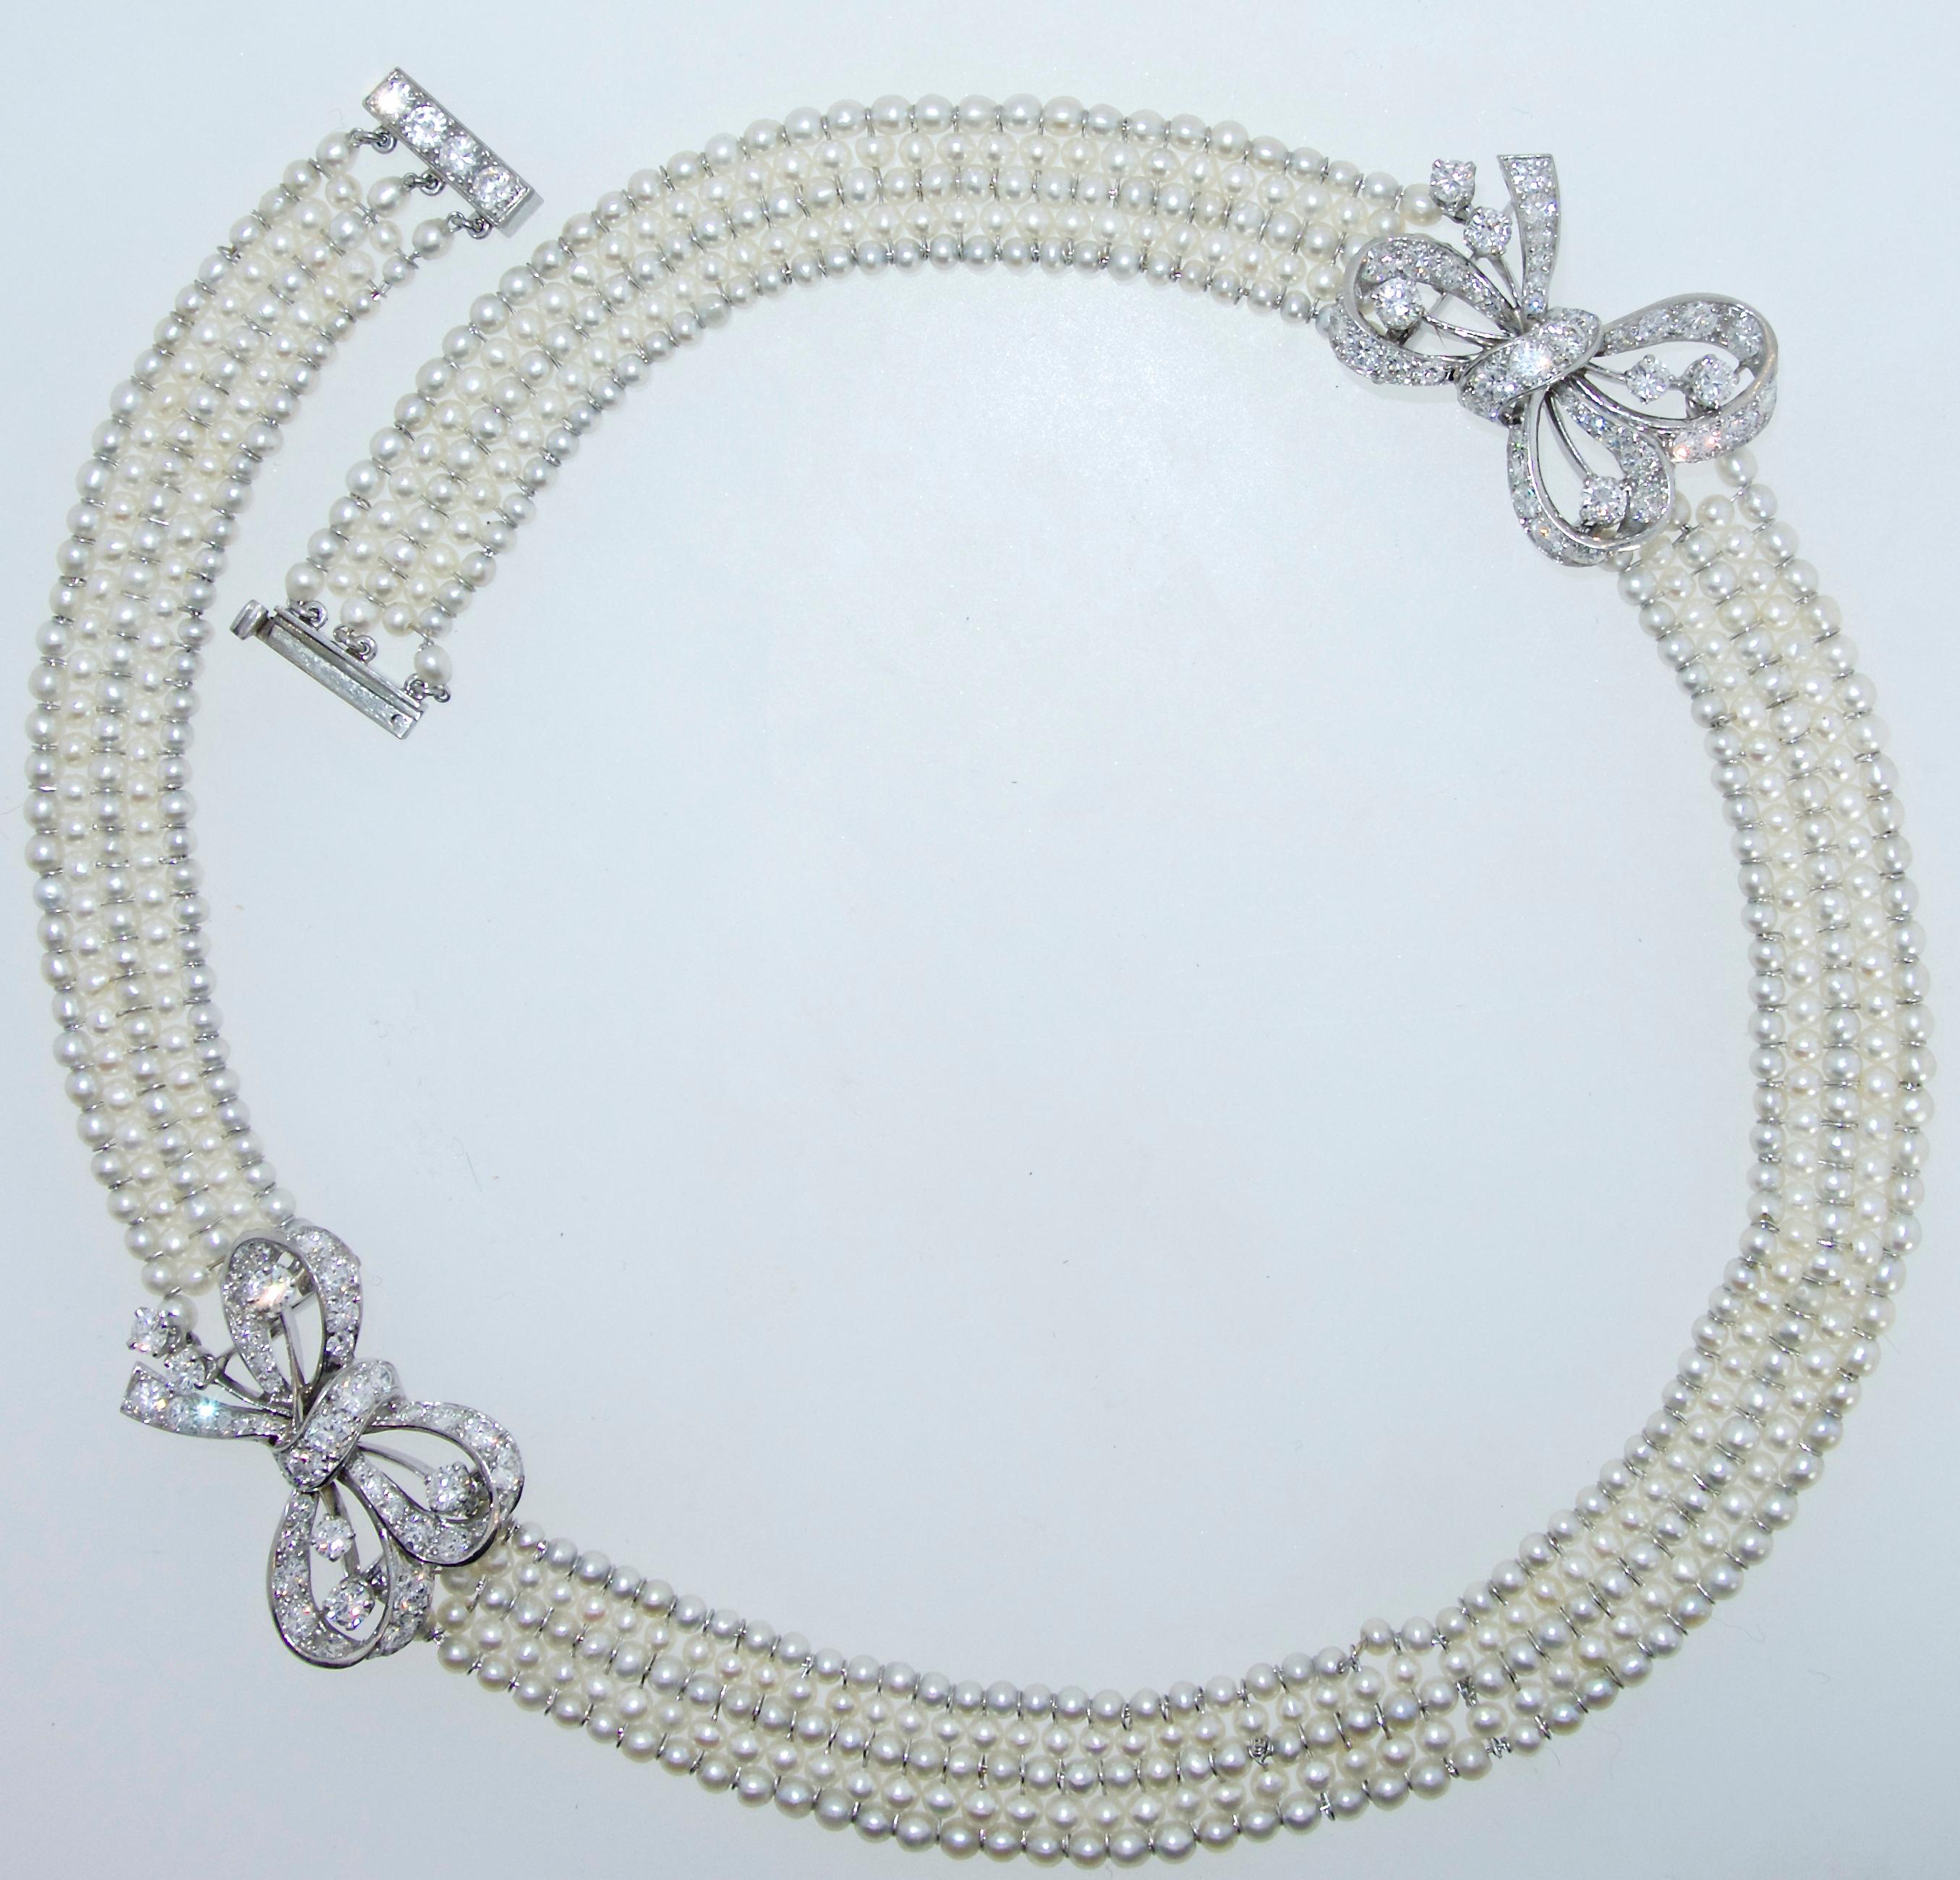 Natural pearl necklace accented with platinum and diamond bows and finished with a diamond and platinum clasp.  This collar necklace is 14 inches long.  The five strands of natural pearls are strung on platinum and have a wonderful luster.  The 86